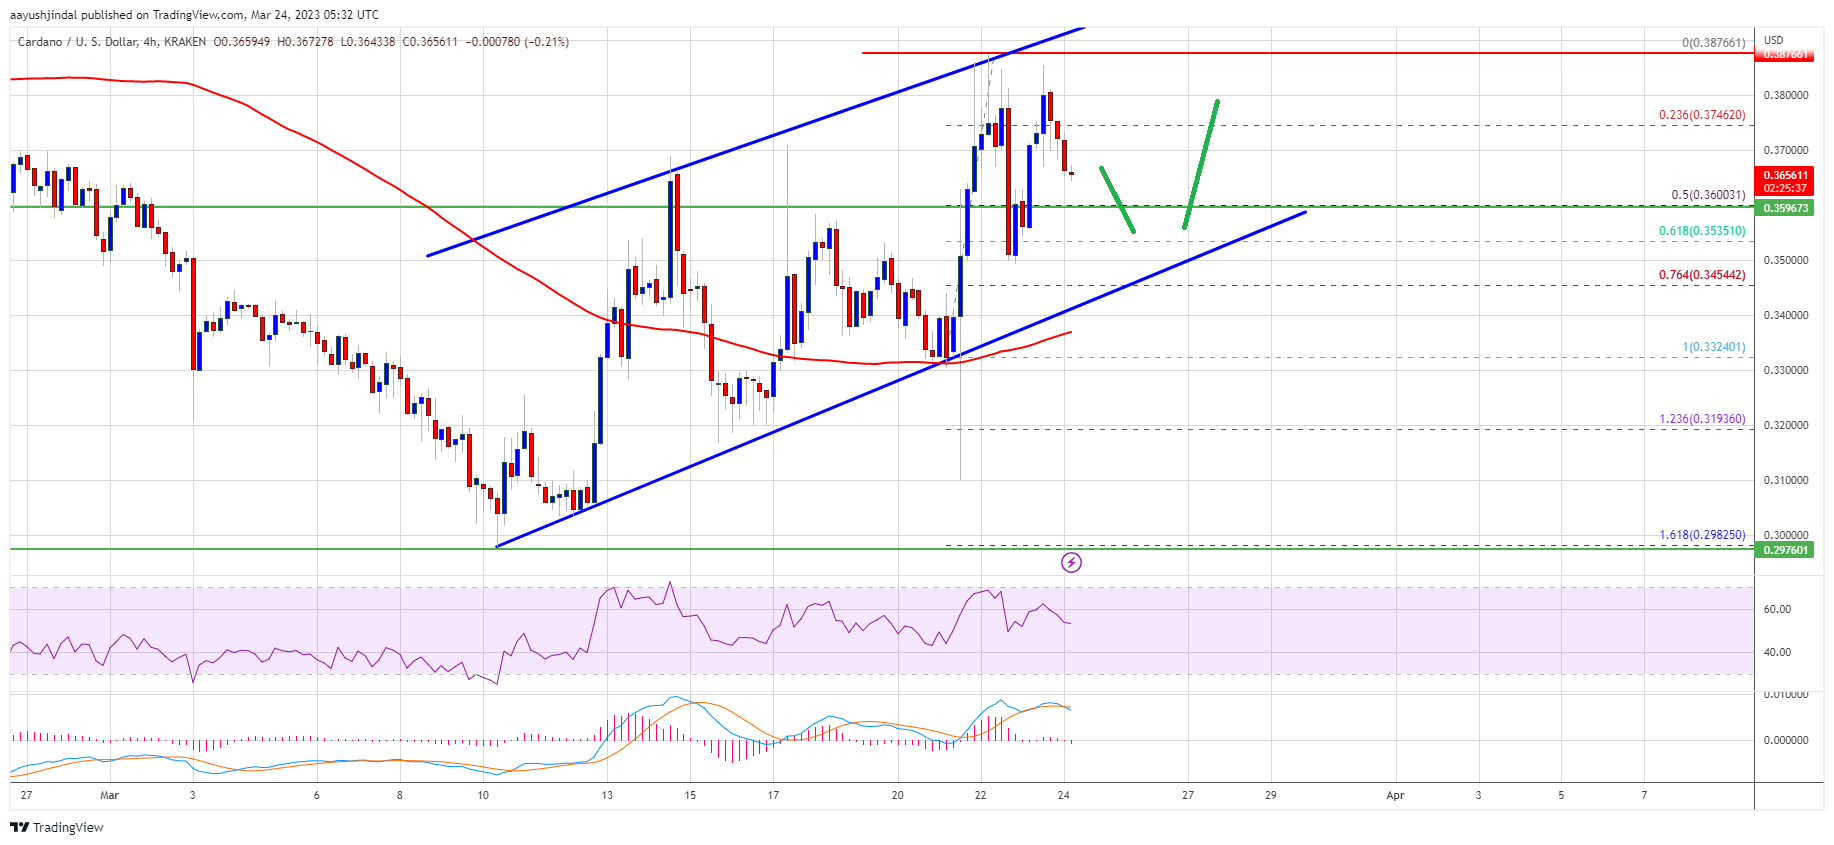 Cardano (ADA) Price Saw Technical Breakout: Big Reaction From Bulls Imminent | Crypto Breaking News